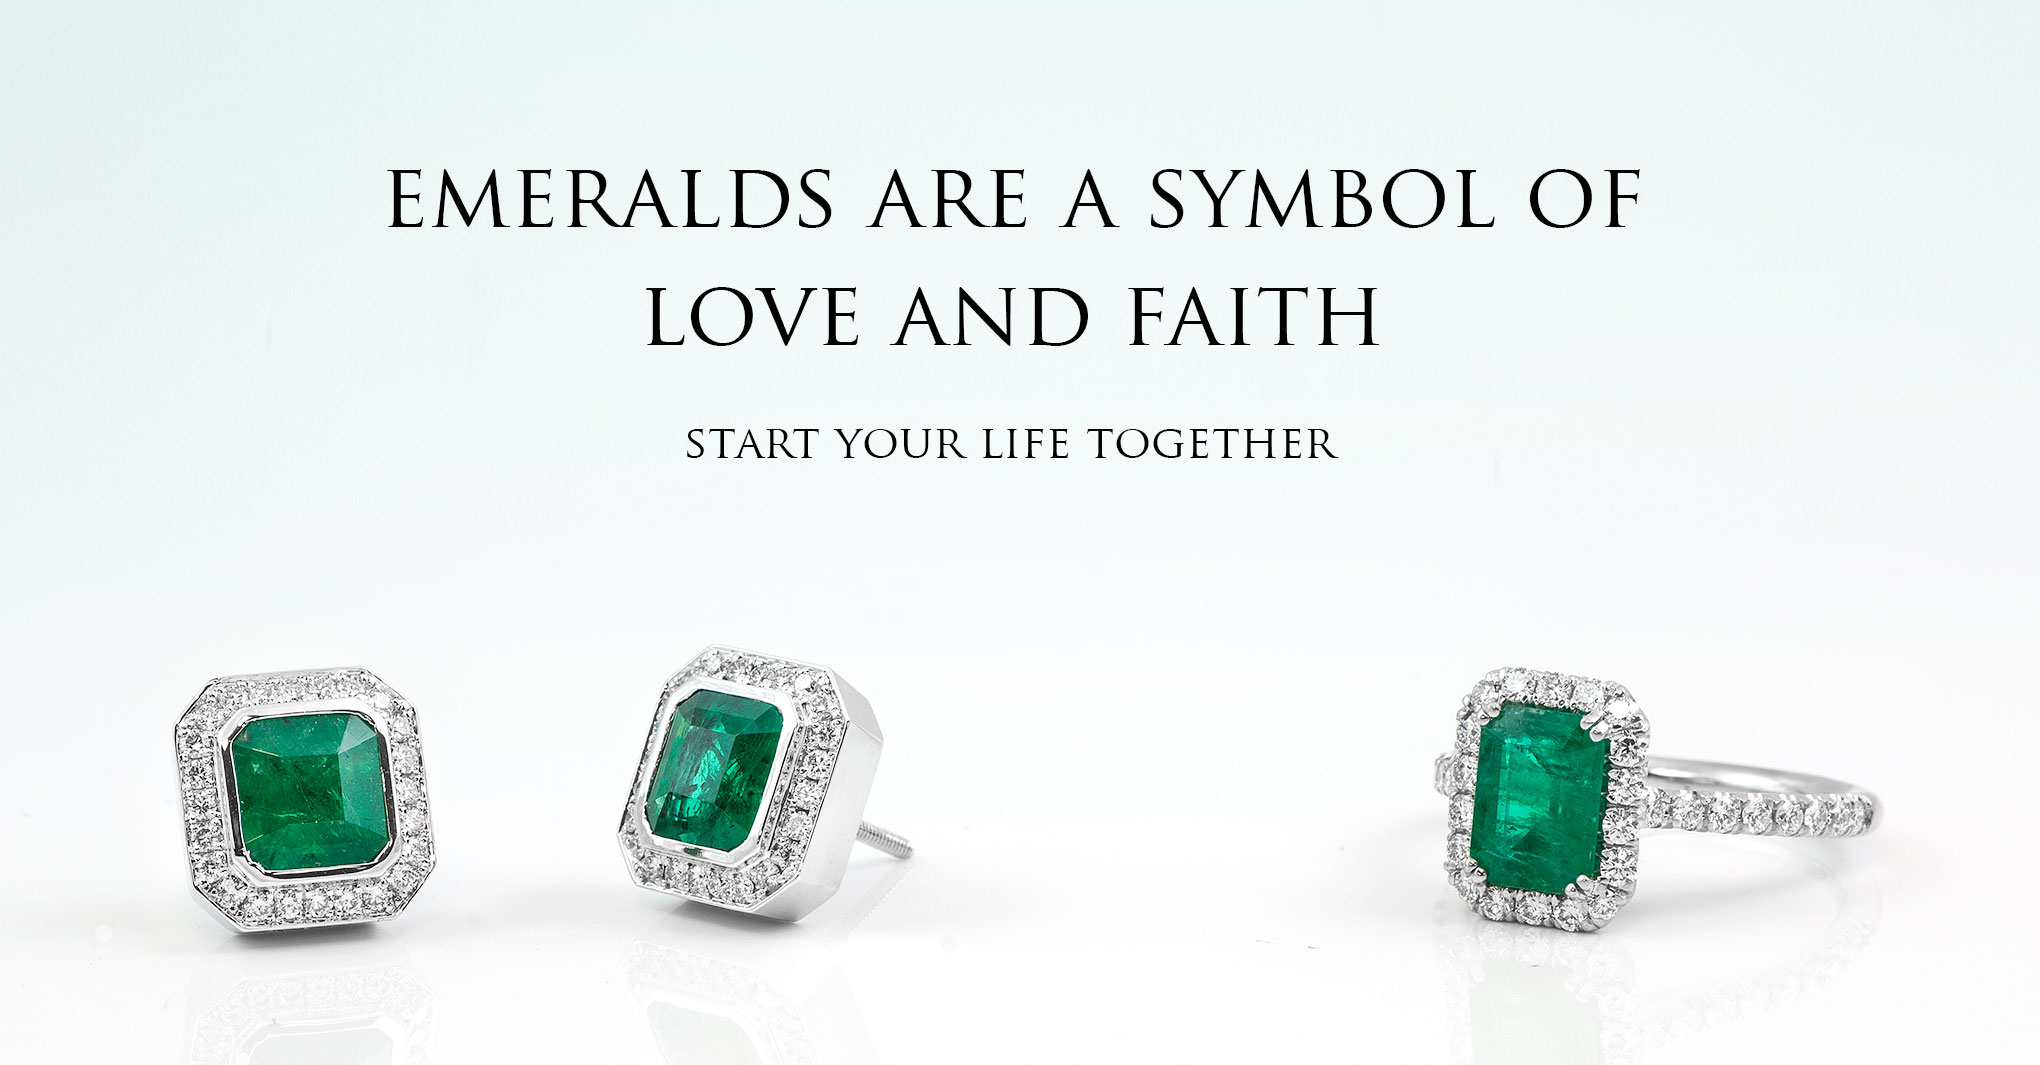 Emerald Engagement Rings and Earrings - 3804 Sepulved Blvd, Torrance Ca 90505